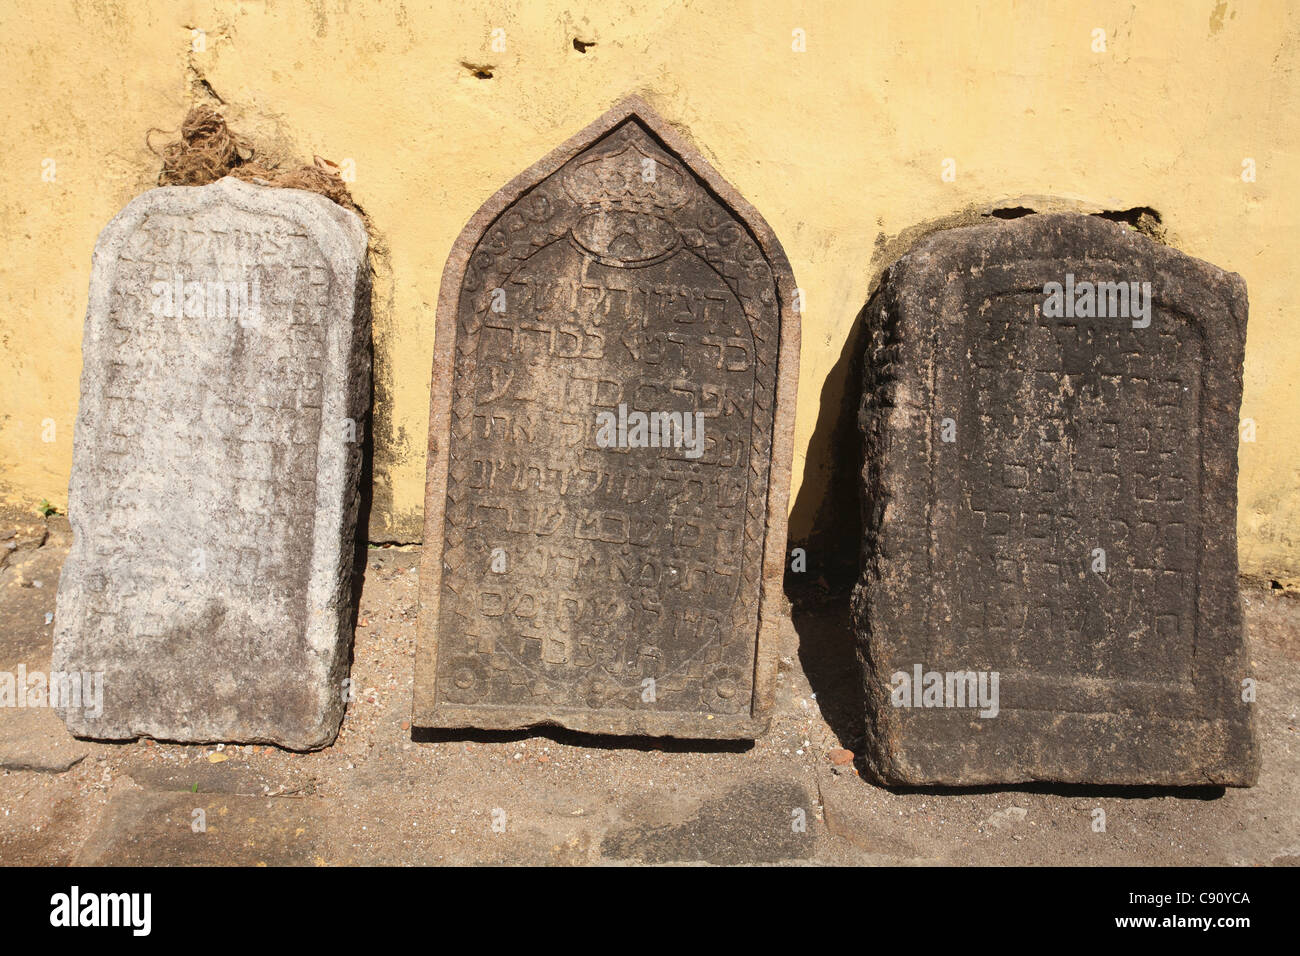 The Paradesi Synagogue in Kochi city is the oldest Jewish building and synagogue in the Commonwealth of Nations. Headstones are Stock Photo